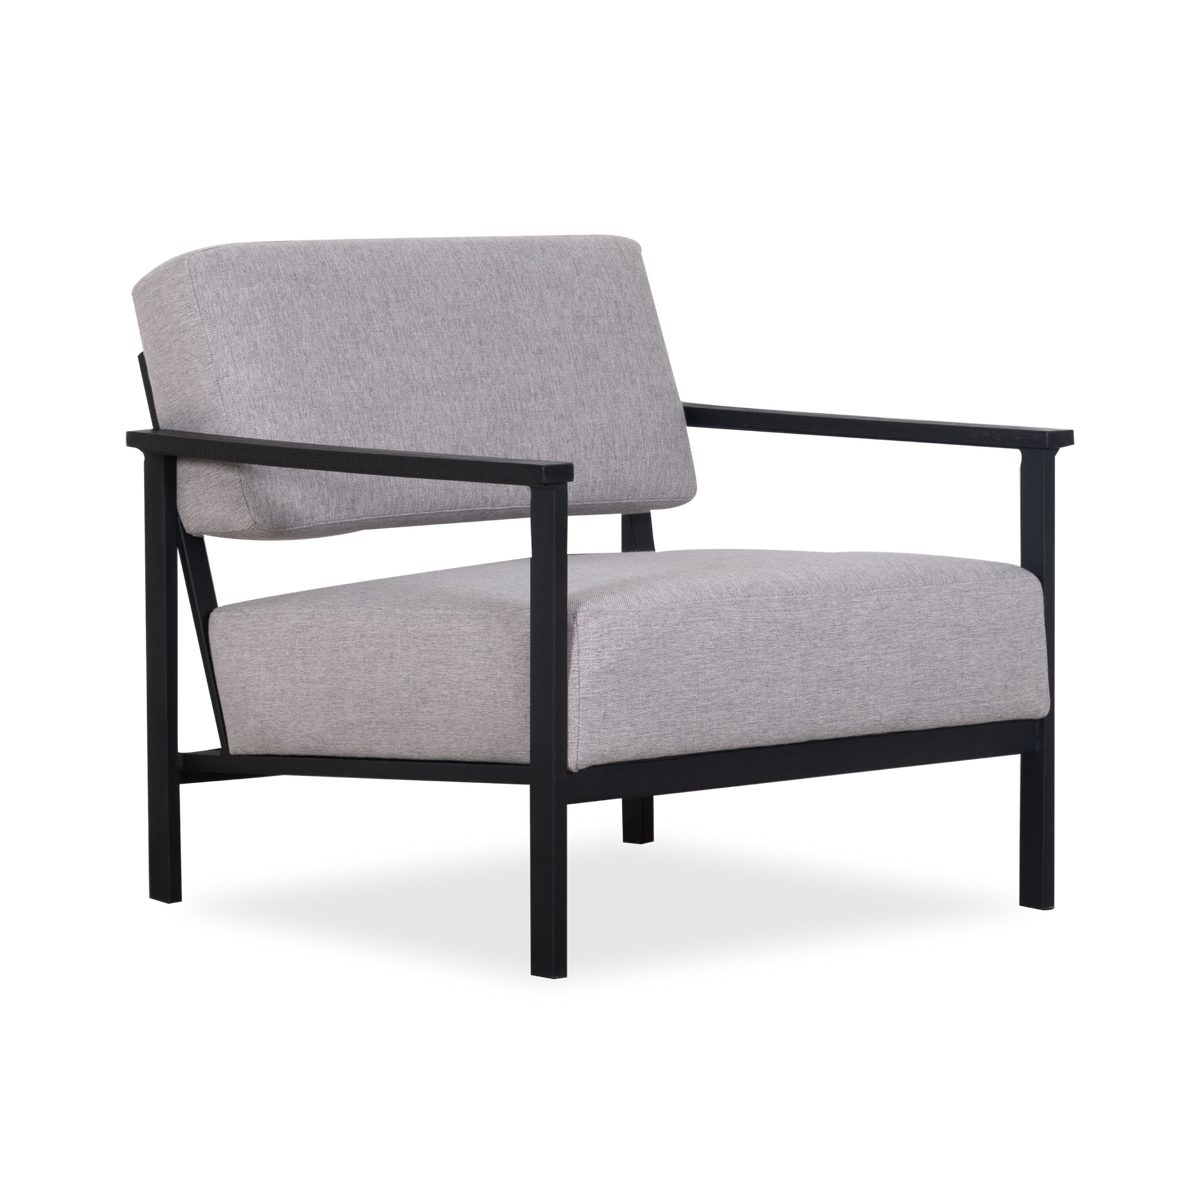 With its industrial edge, the Ford Lounge Chair creates a modern aesthetic unlike any other.